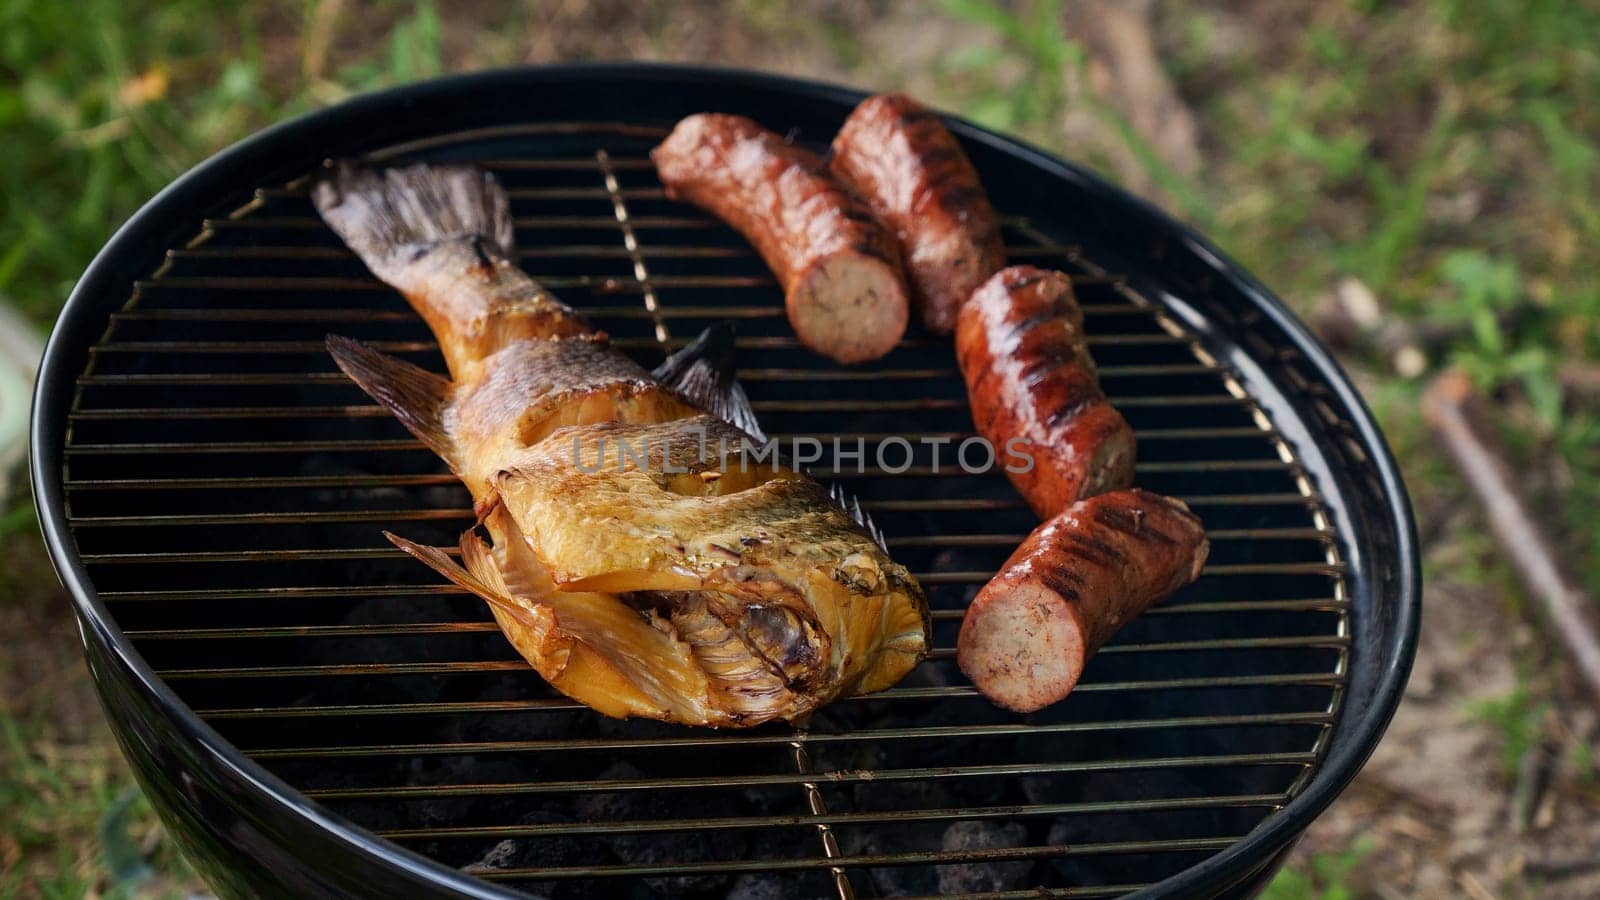 Top view of fresh grilled whole fish, skewer, sausages on round black charcoal grill, green grass background. Barbecue, grill and food concept. Camping with family. by JuliaDorian